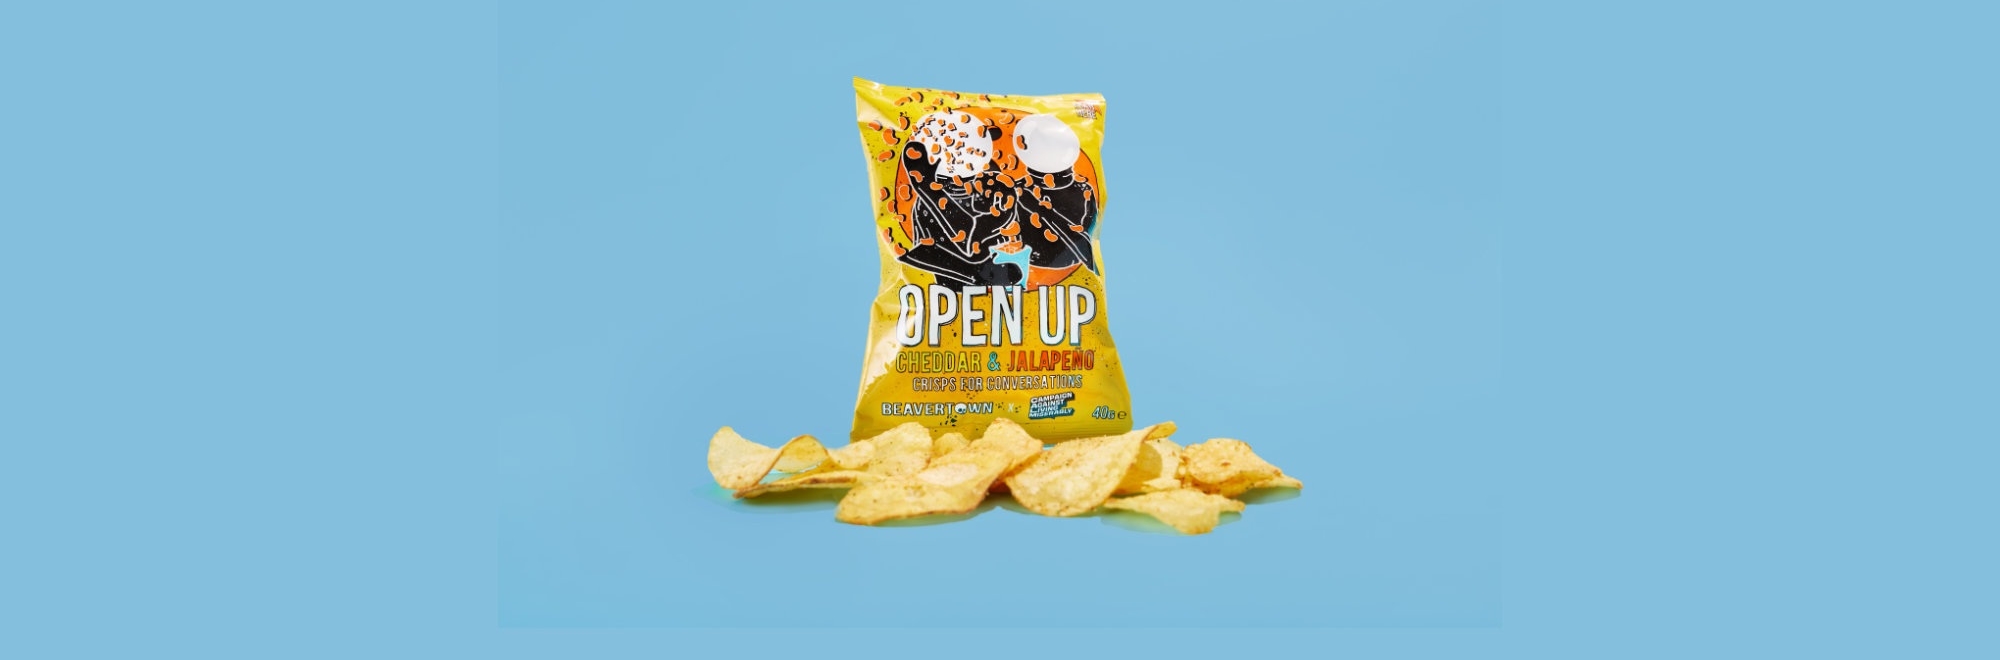 Fancy some crisps, mate? New pub snack launches to help nation open up about their mental health